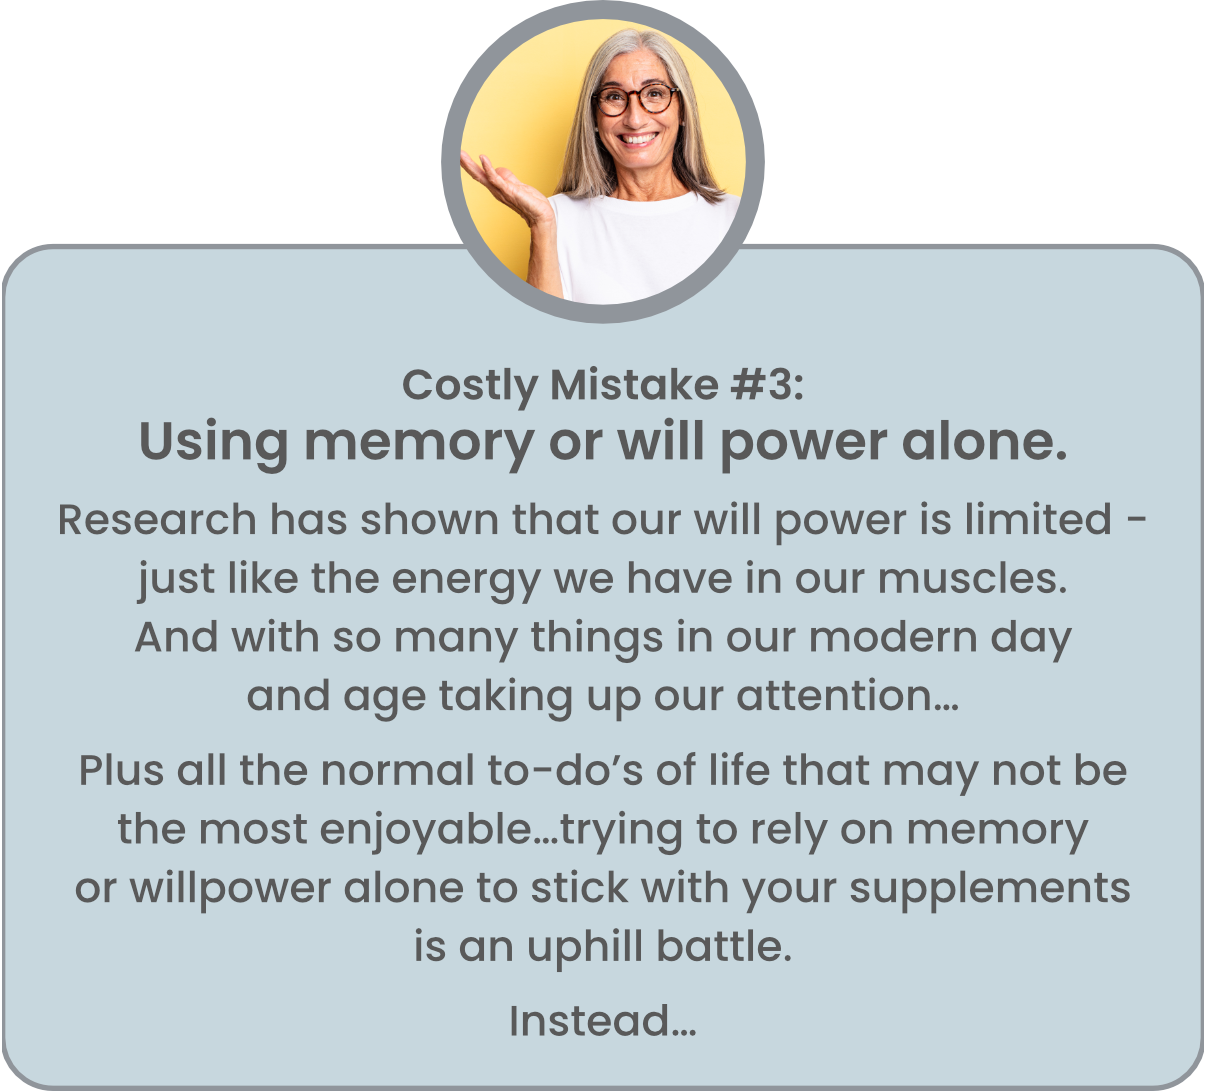 Costly Mistake #3: Using memory or will power alone